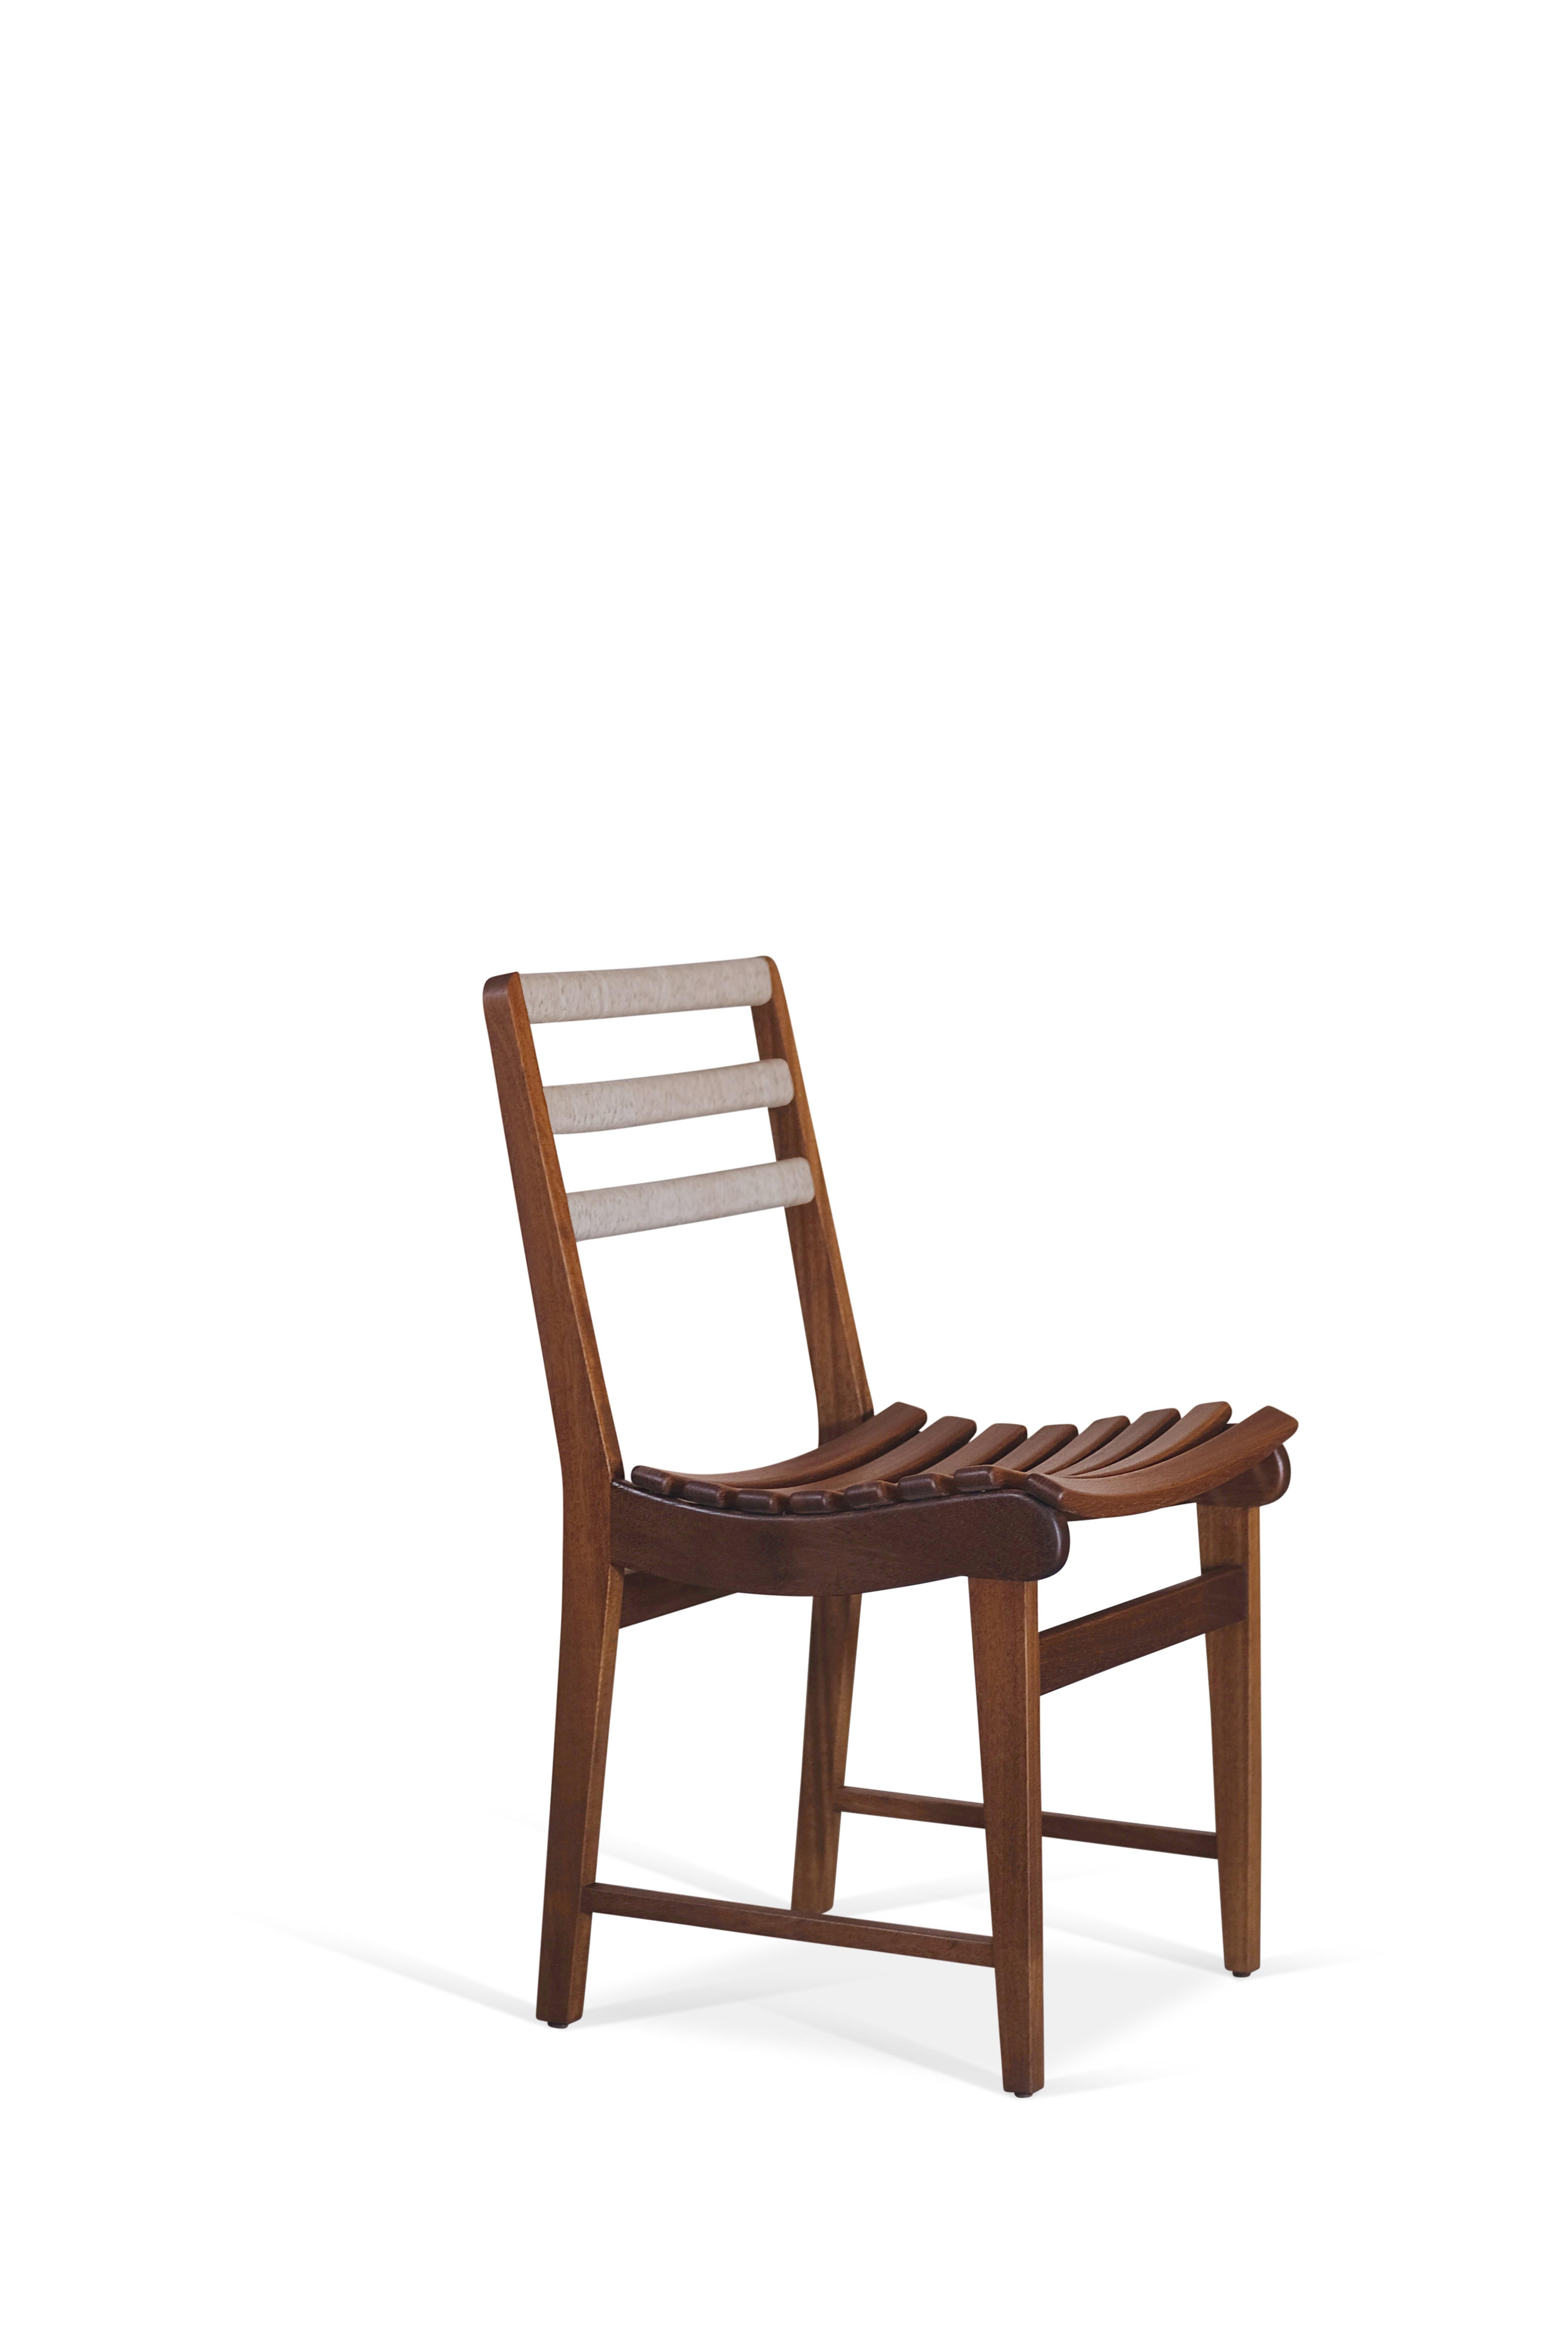 Miguelito Dining Chair in solid wood and palm by Michael van Beuren from Luteca For Sale